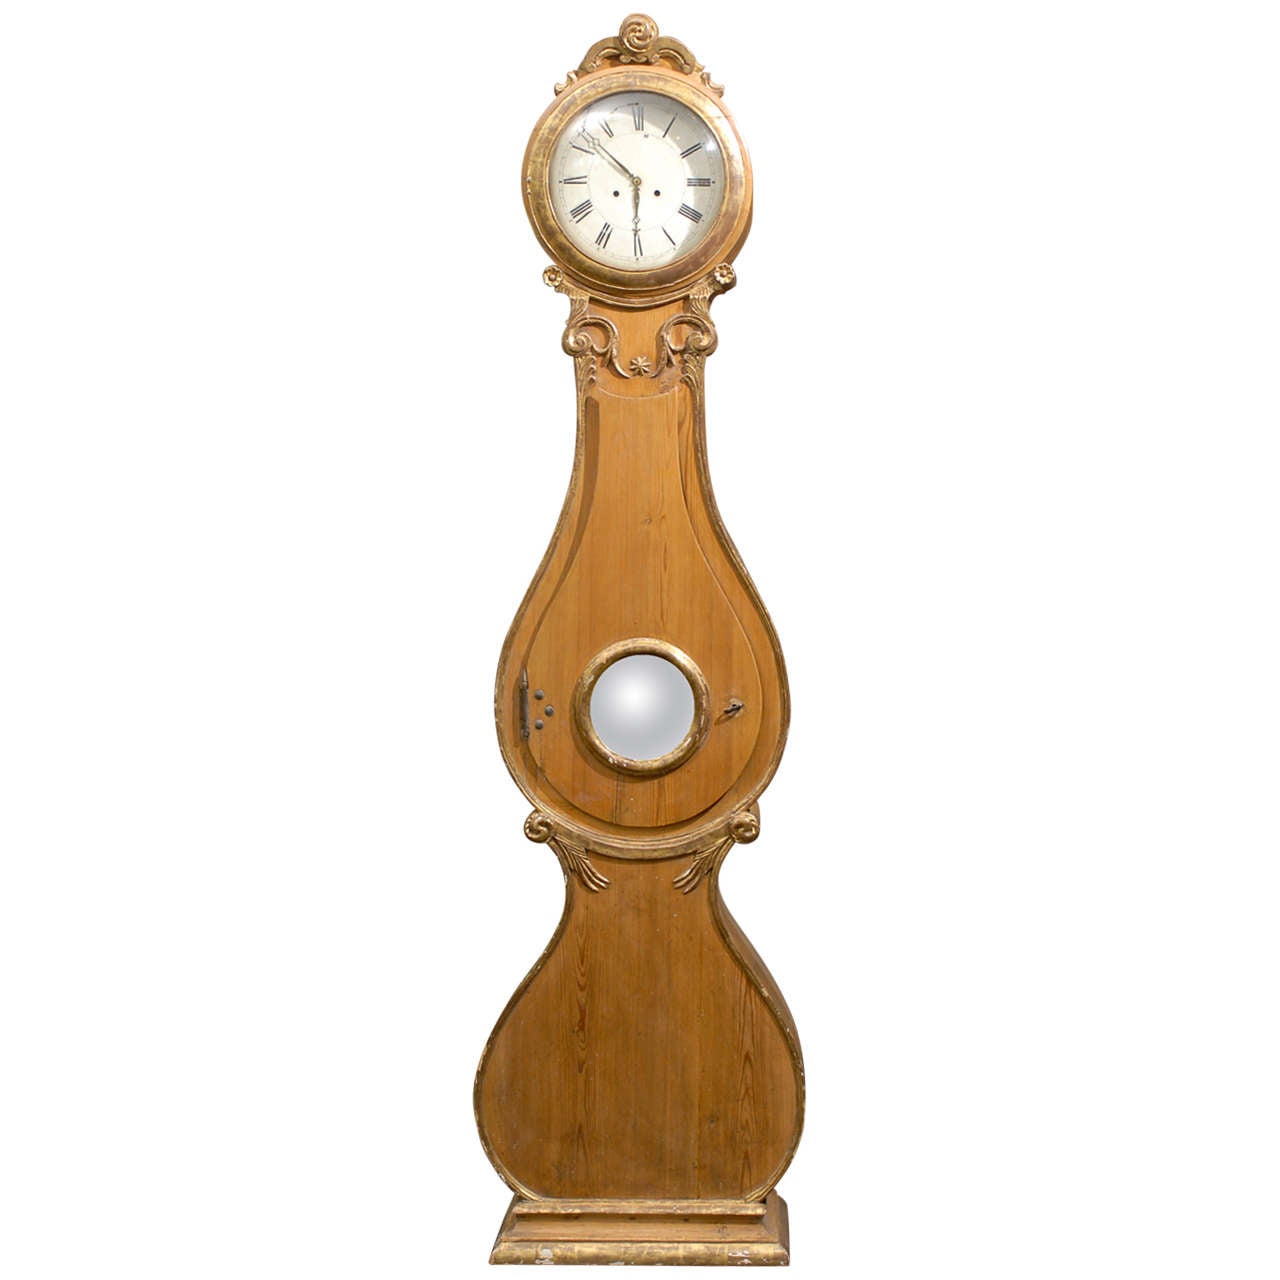 19th Century Fryksdahl Wooden Swedish Clock with Gilded Accents